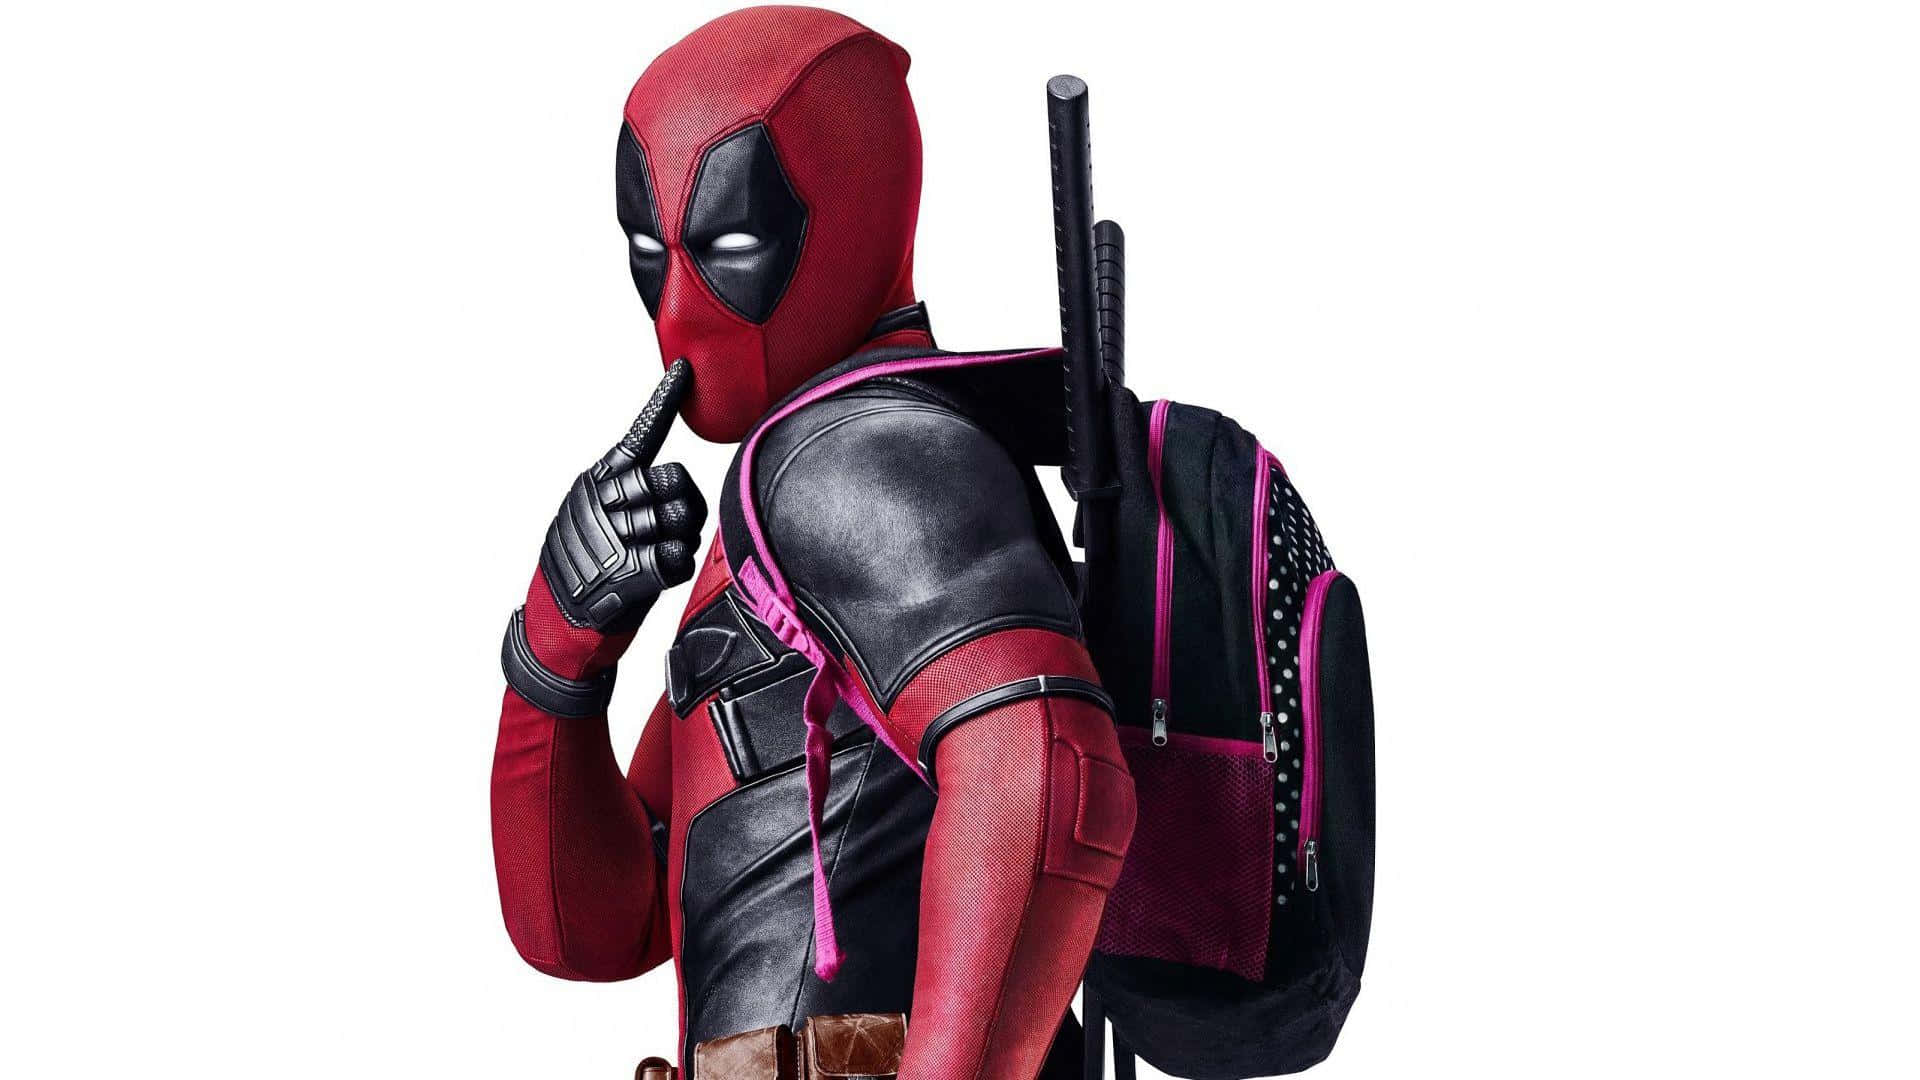 Deadpool standing on a rooftop, overlooking the city Wallpaper